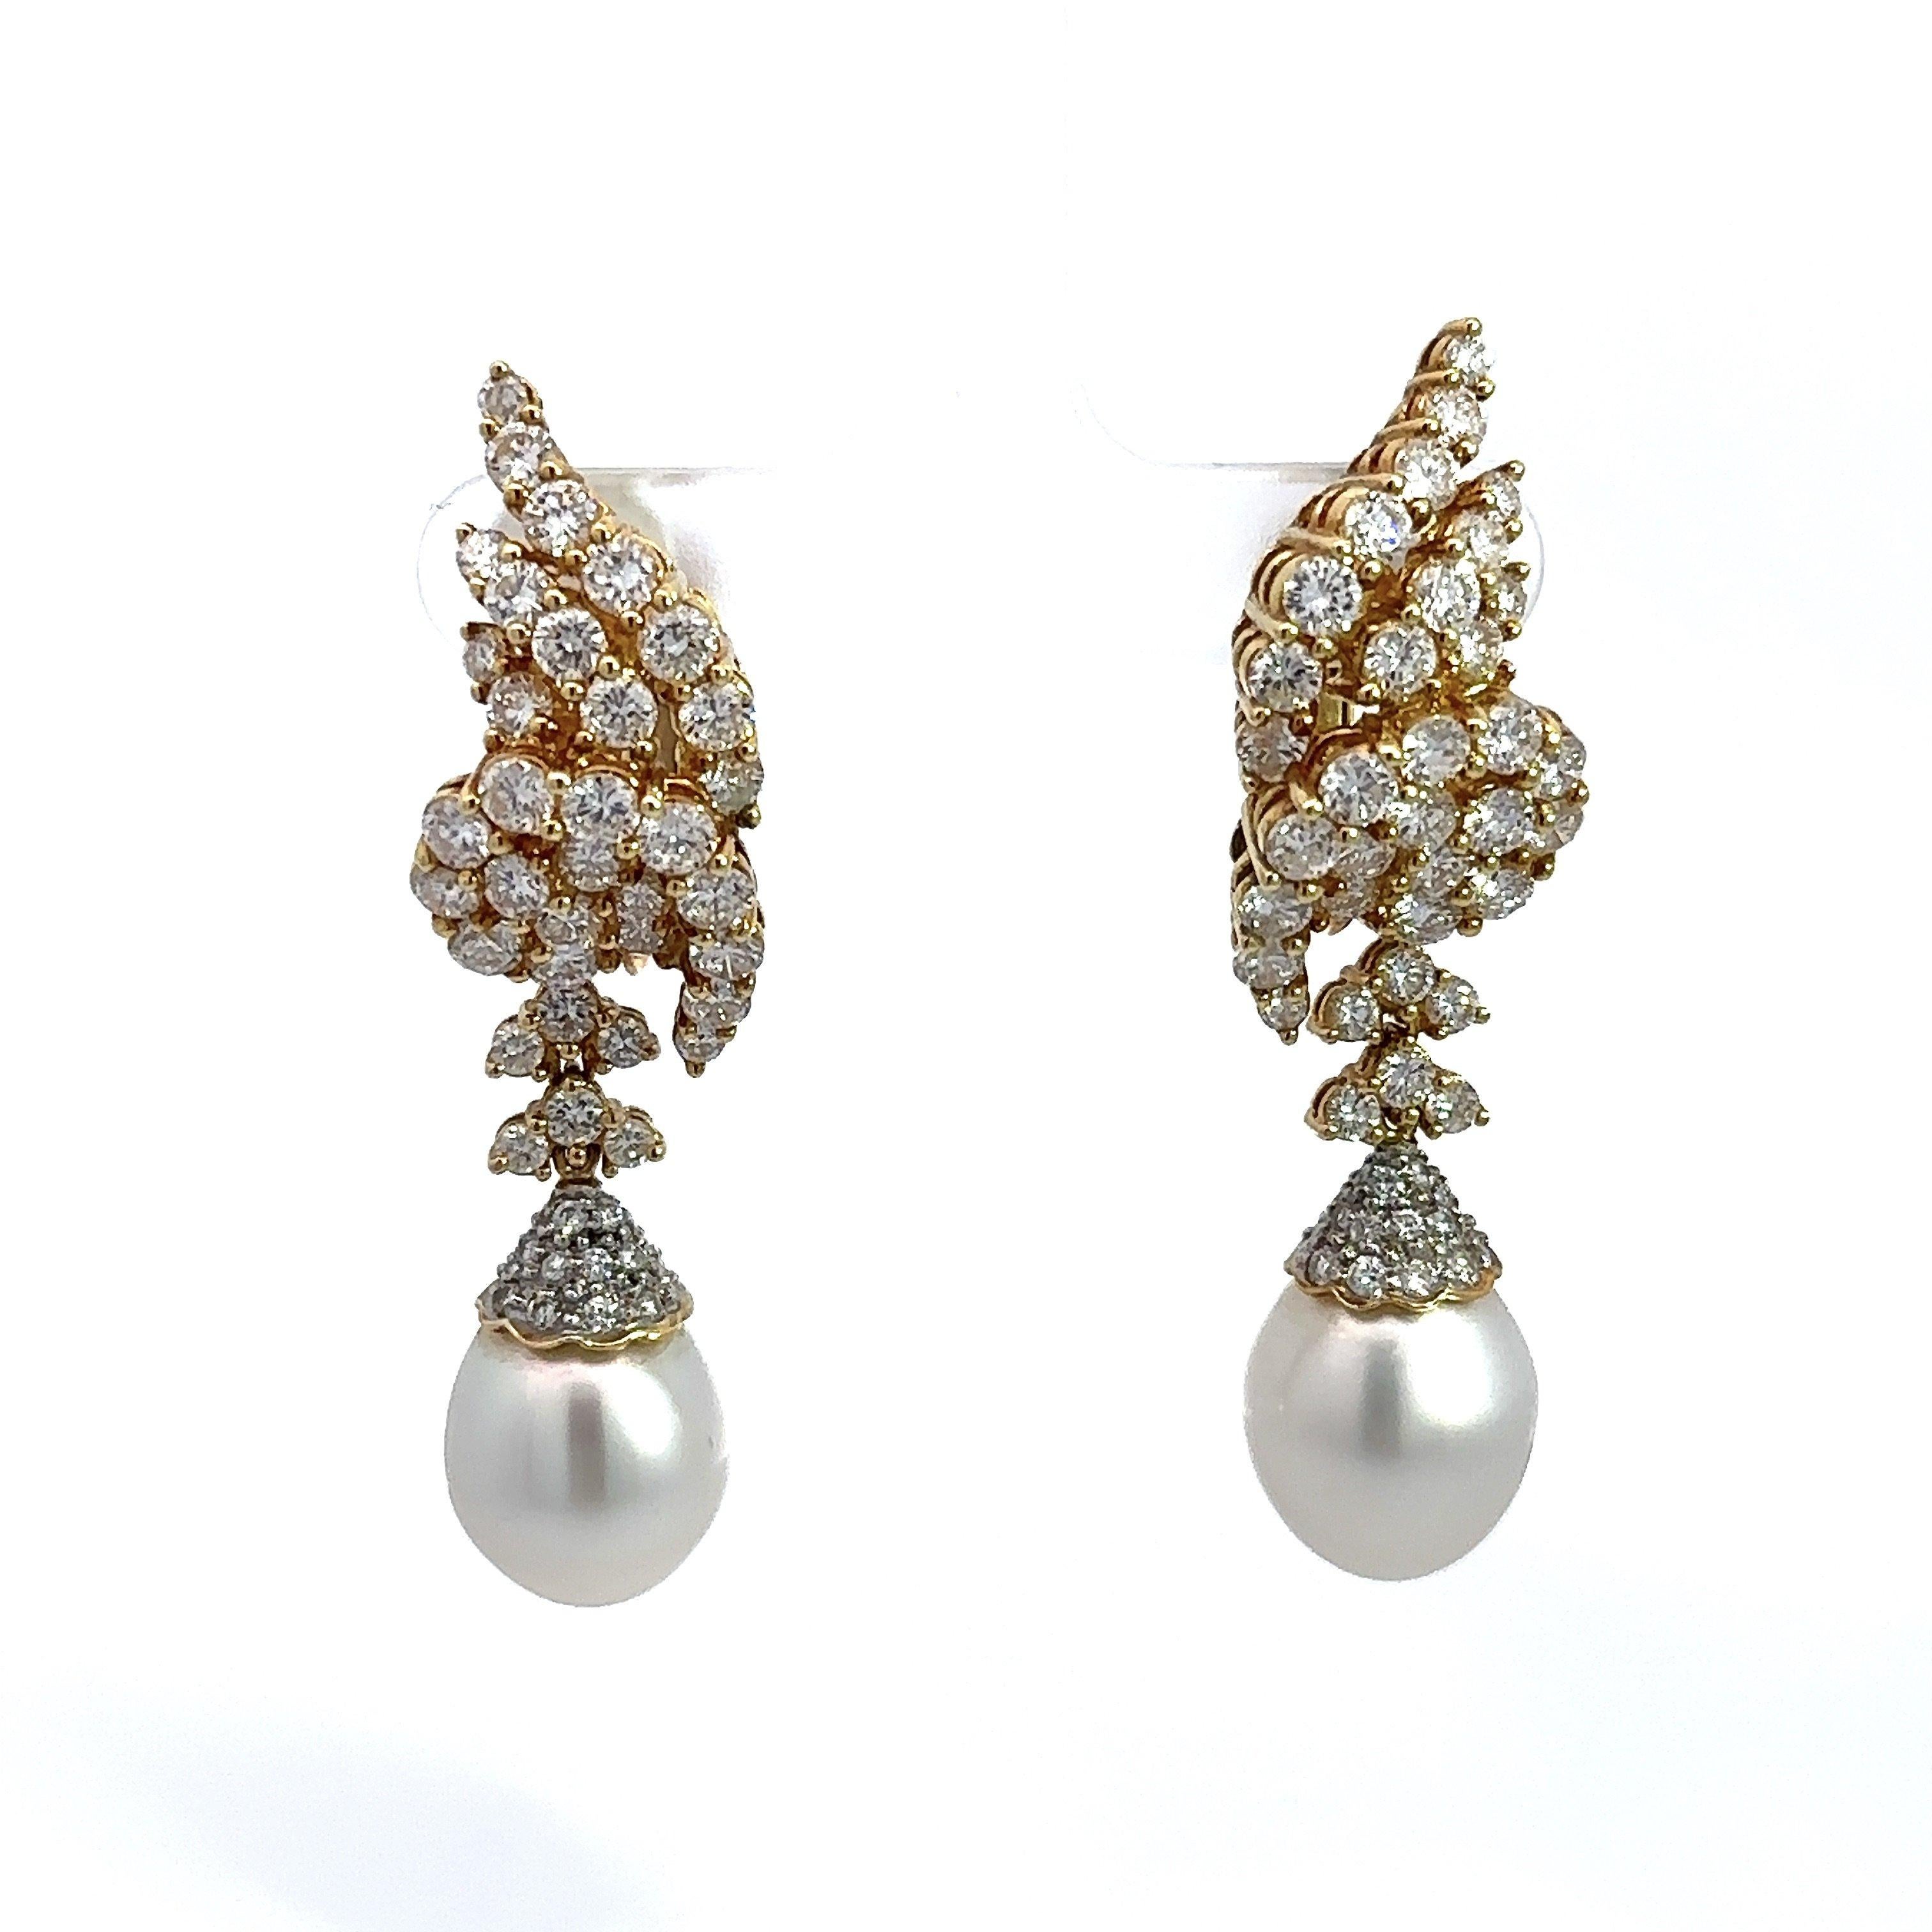 These south sea pearl dangle earrings are crafted in 18KT yellow gold and are adorned with 7CT of sparkling diamonds, F-G Color, VS Clarity. The total length of the earring is approximately 2